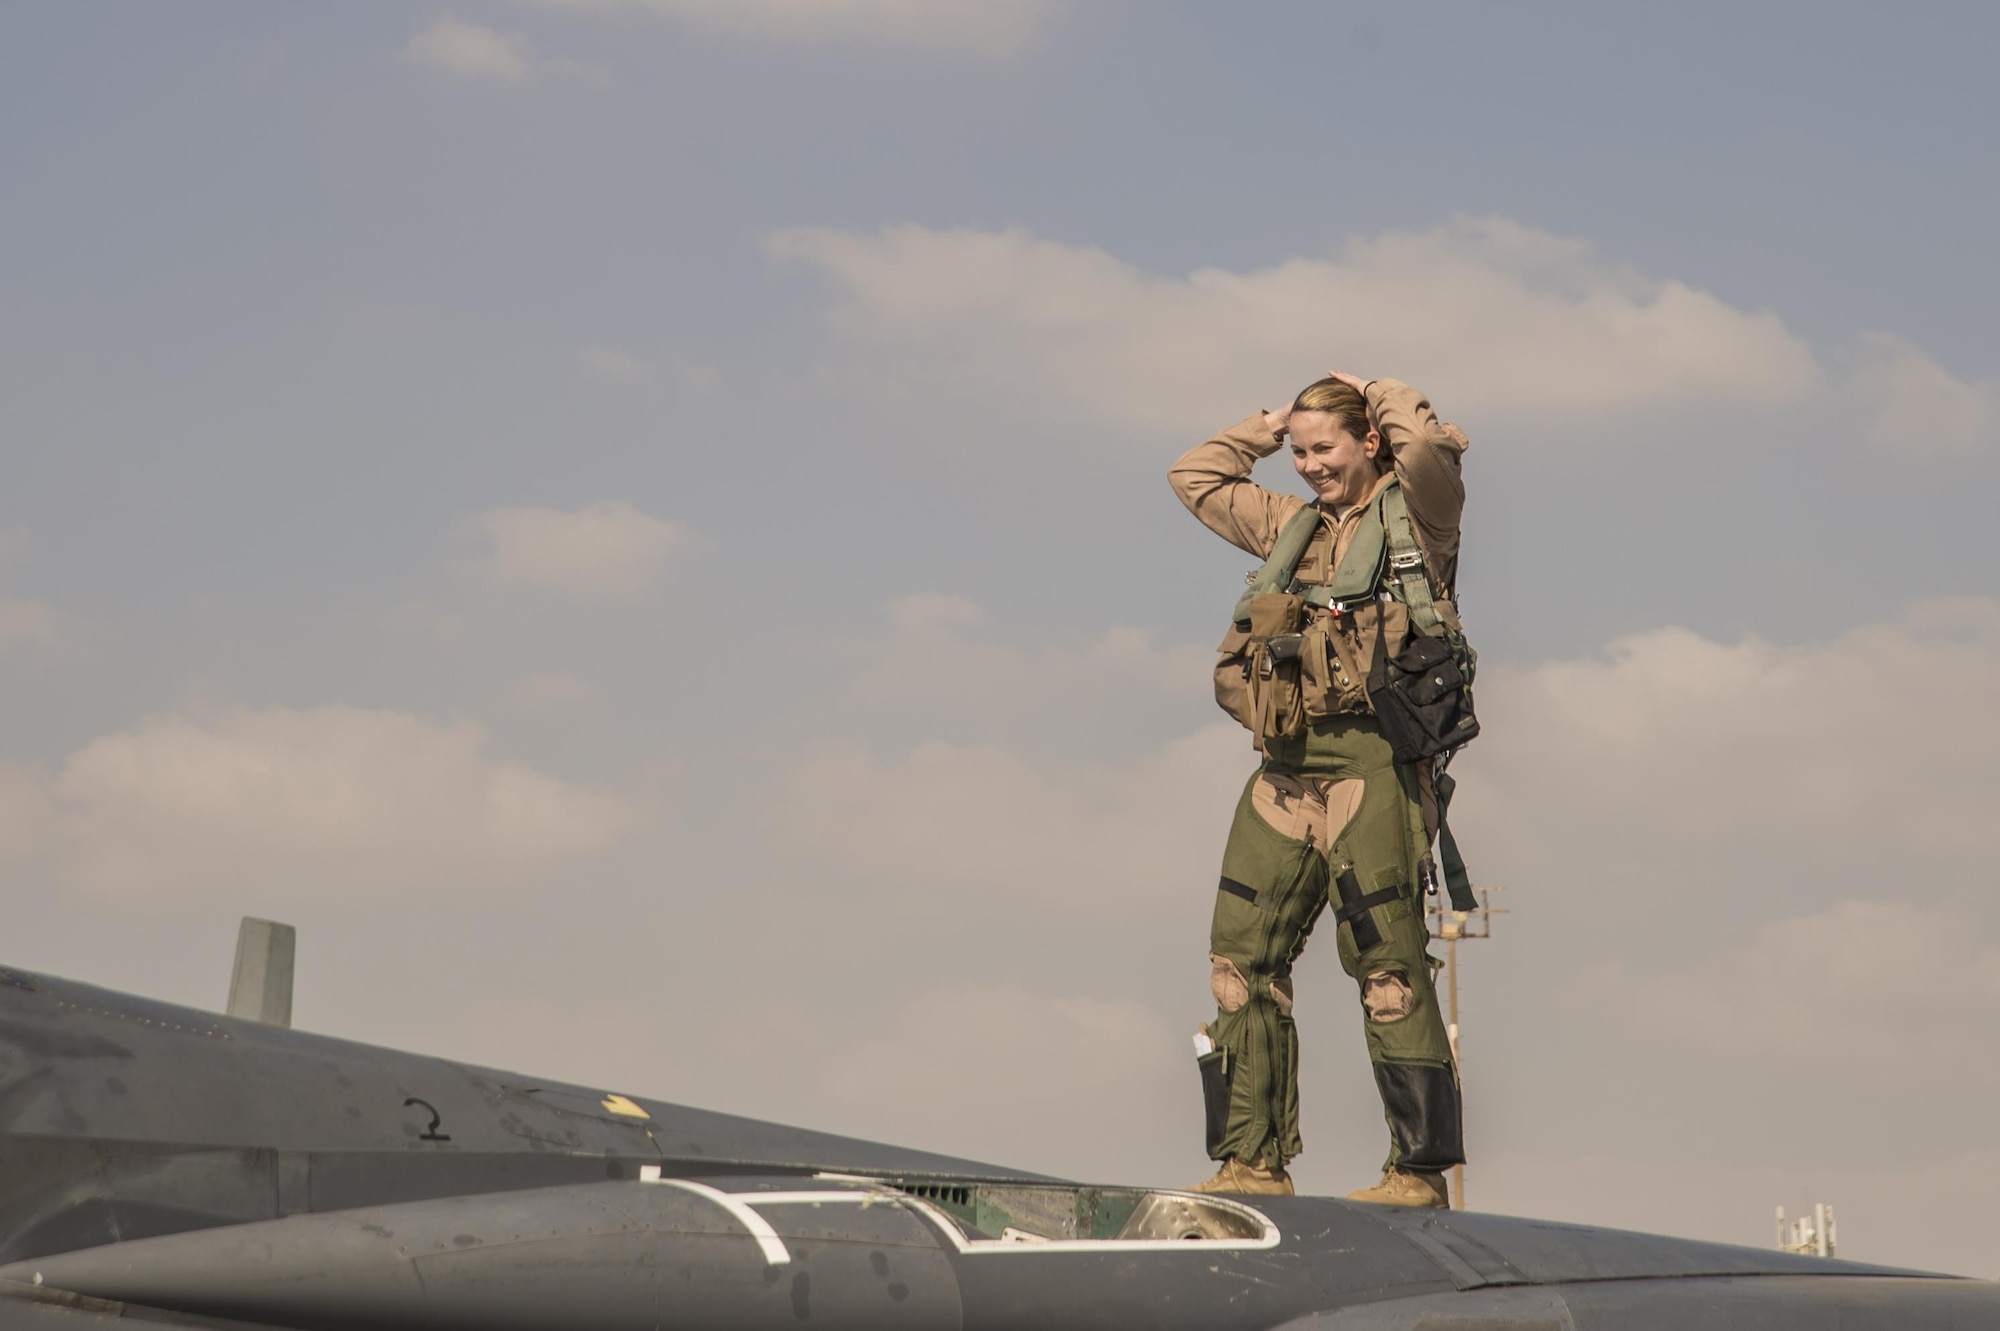 391st Expeditionary Fighter Squadron weapon systems officer, call sign Swat, stands on top of an F-15E Strike Eagle following a combat sortie at an undisclosed location in Southwest Asia, Feb. 13, 2016. Swat surpassed the 1,000 combat flight hour mark during the mission in support of Operation Inherent Resolve. (U. S. Air Force photo by Tech. Sgt. Frank Miller/Released)